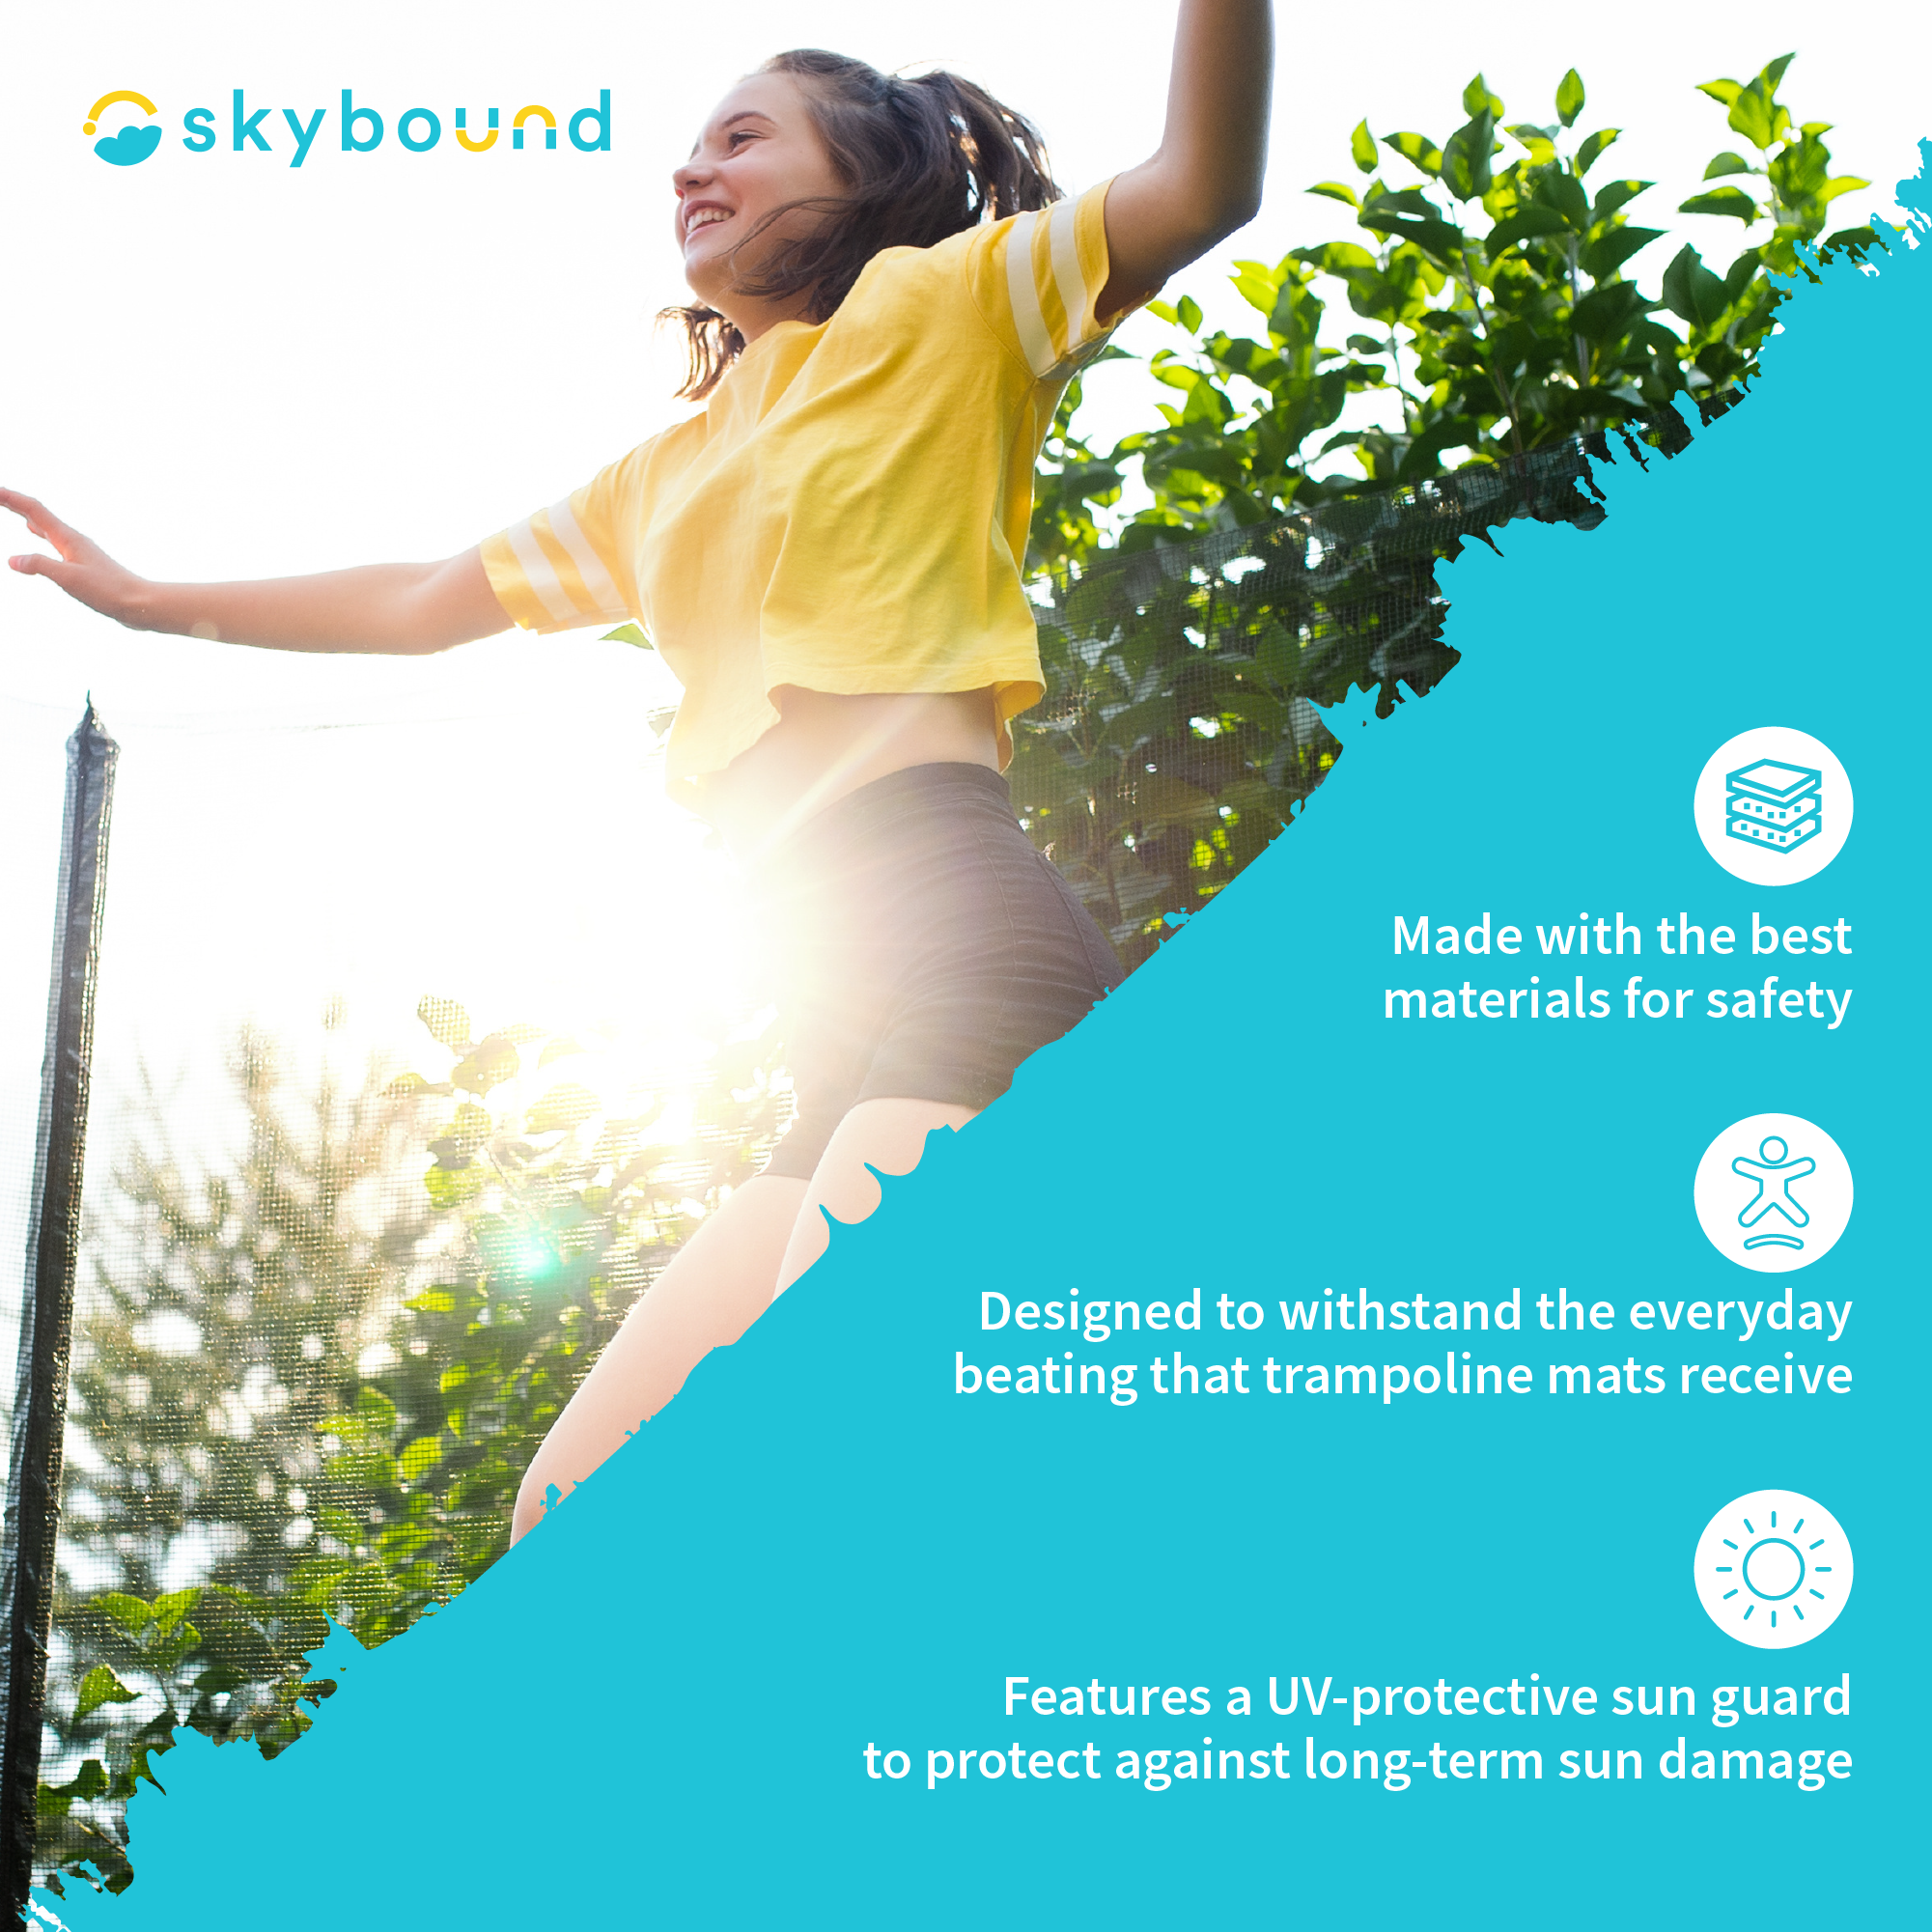 SkyBound: Made with the best materials for safety, Designed to withstand the everyday beating that trampoline mats receive, Features a UV-protective sun guard to protect against long-term sun damage.  